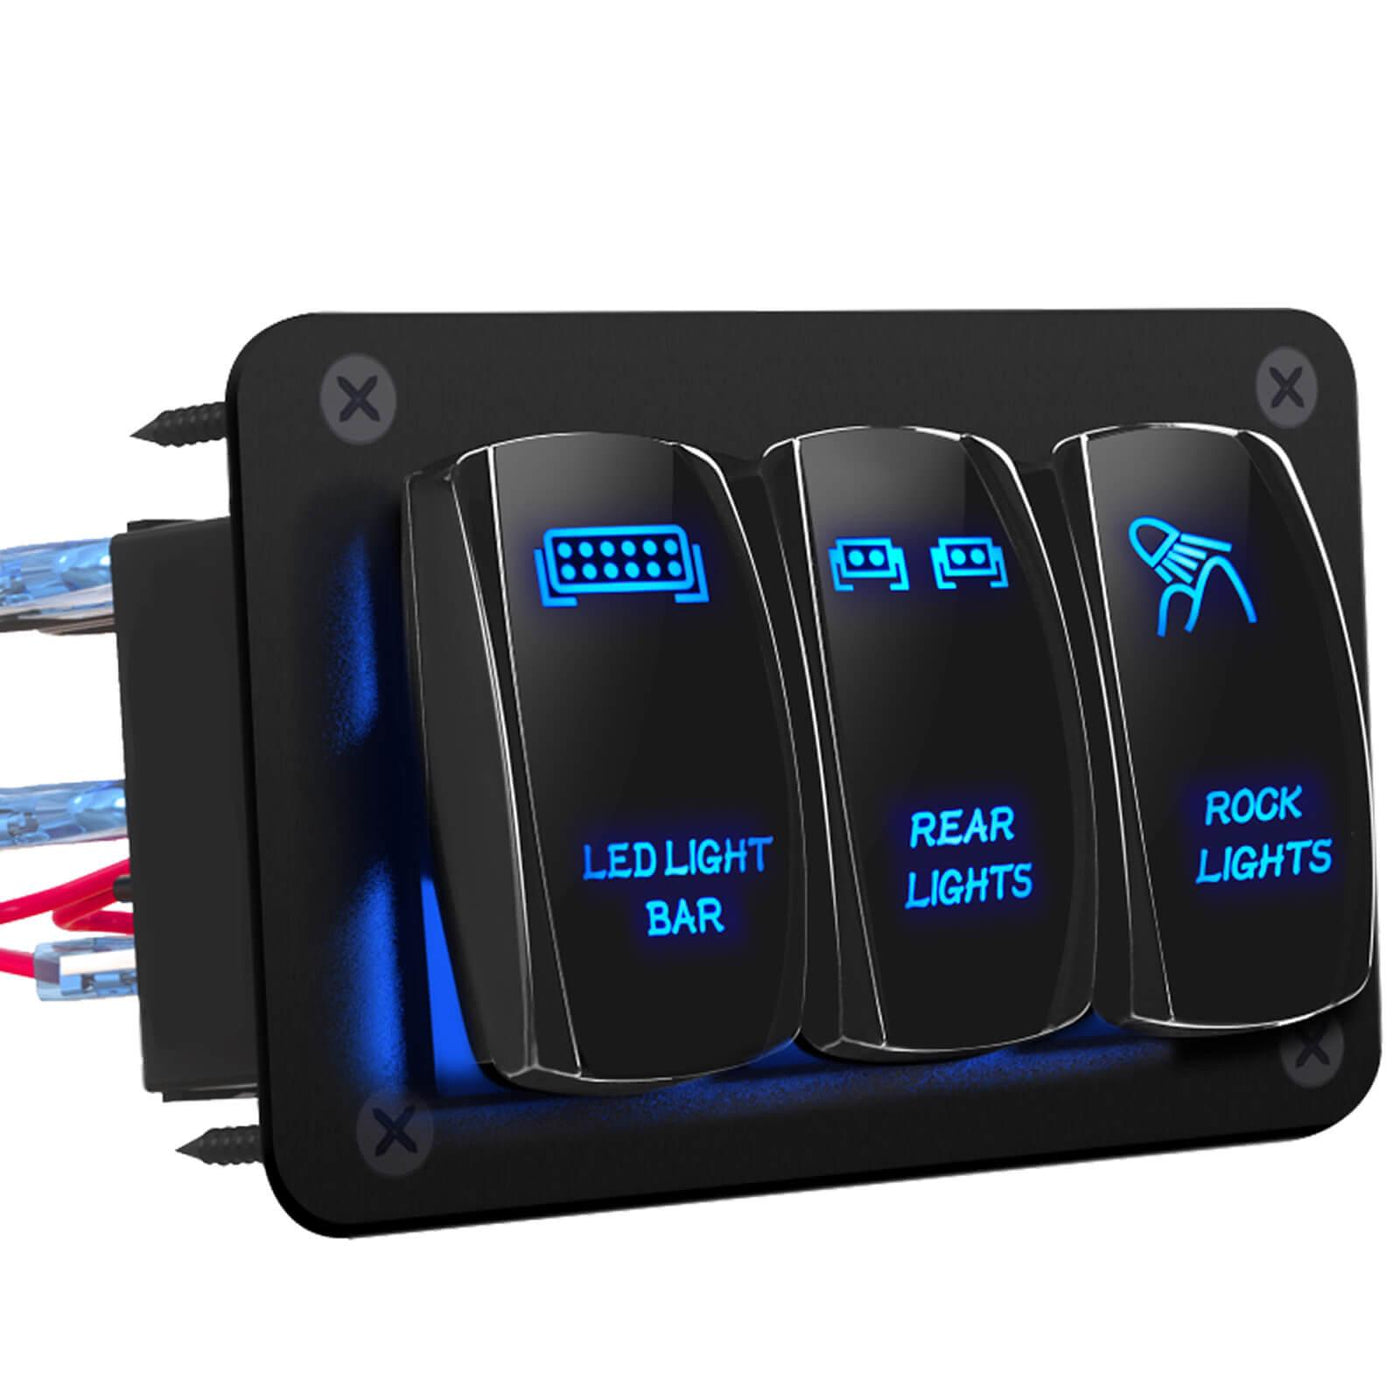 3 Gang Metal LED Light Bar Bright Lacquer 12V Switch Panel best price